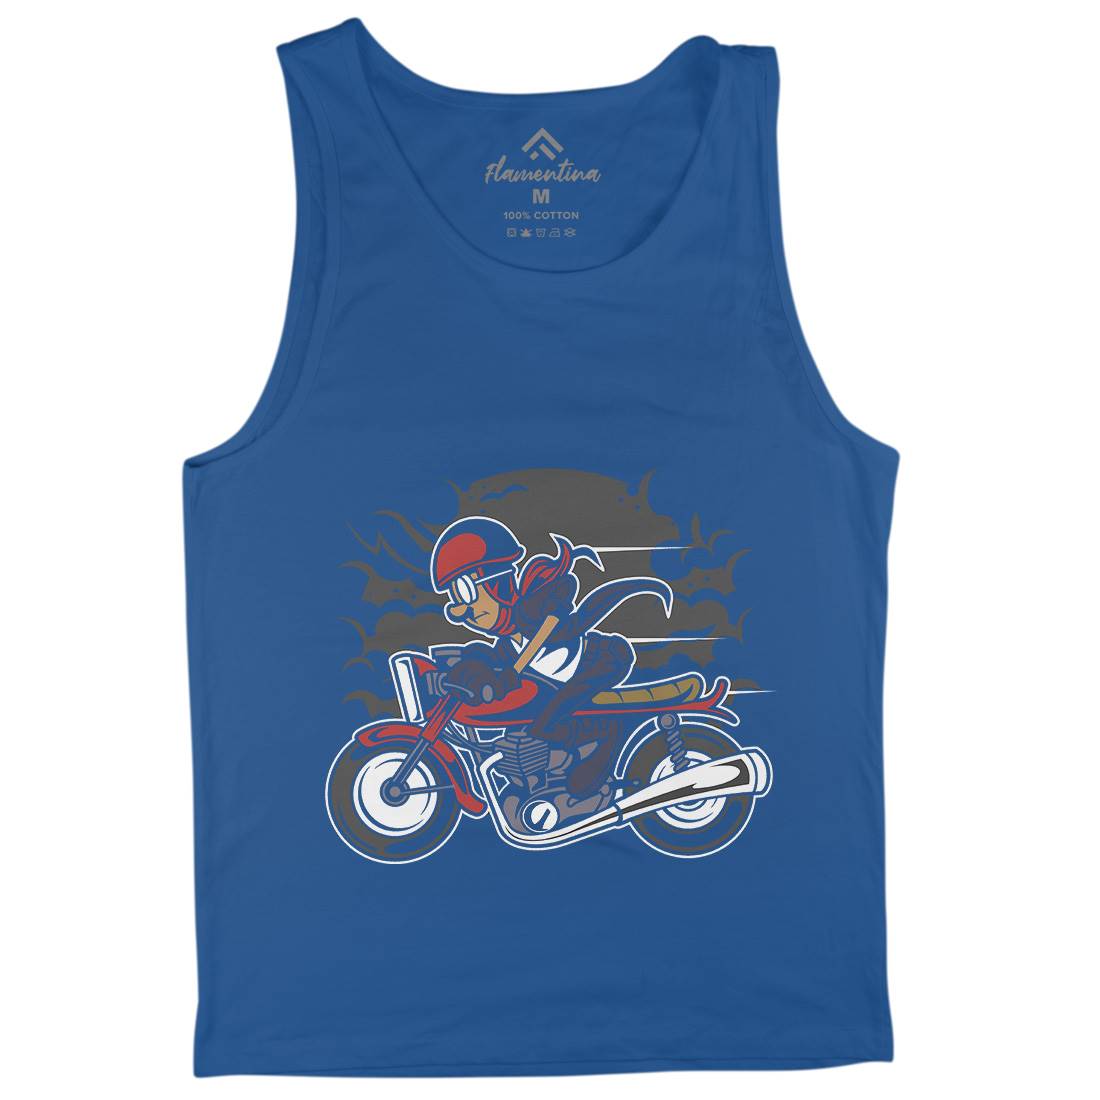 Caferacer Mens Tank Top Vest Motorcycles C325